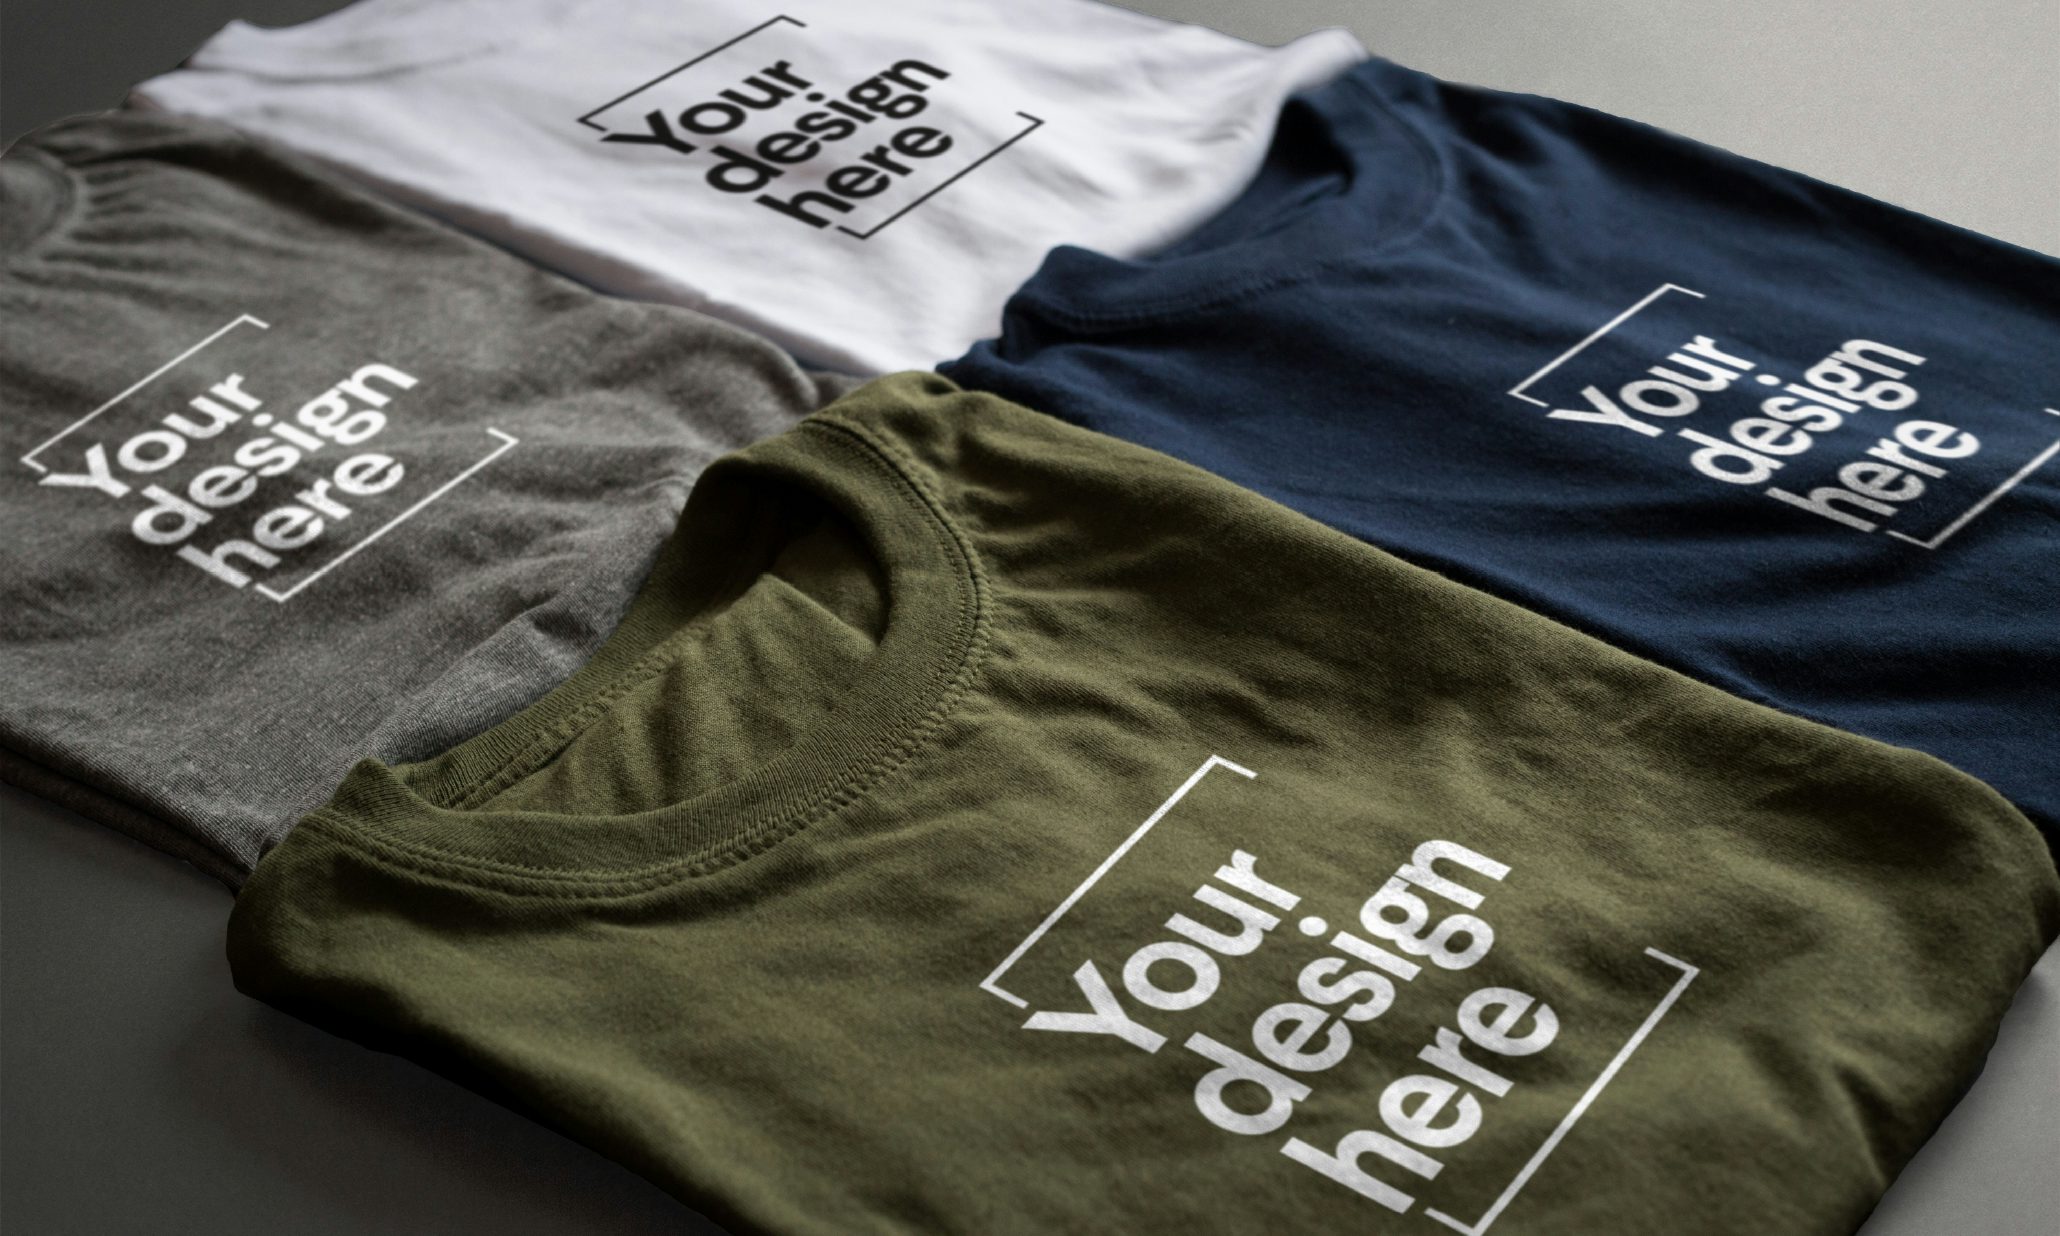 Disse Underholde Latterlig How to design a t-shirt: the ultimate guide - 99designs